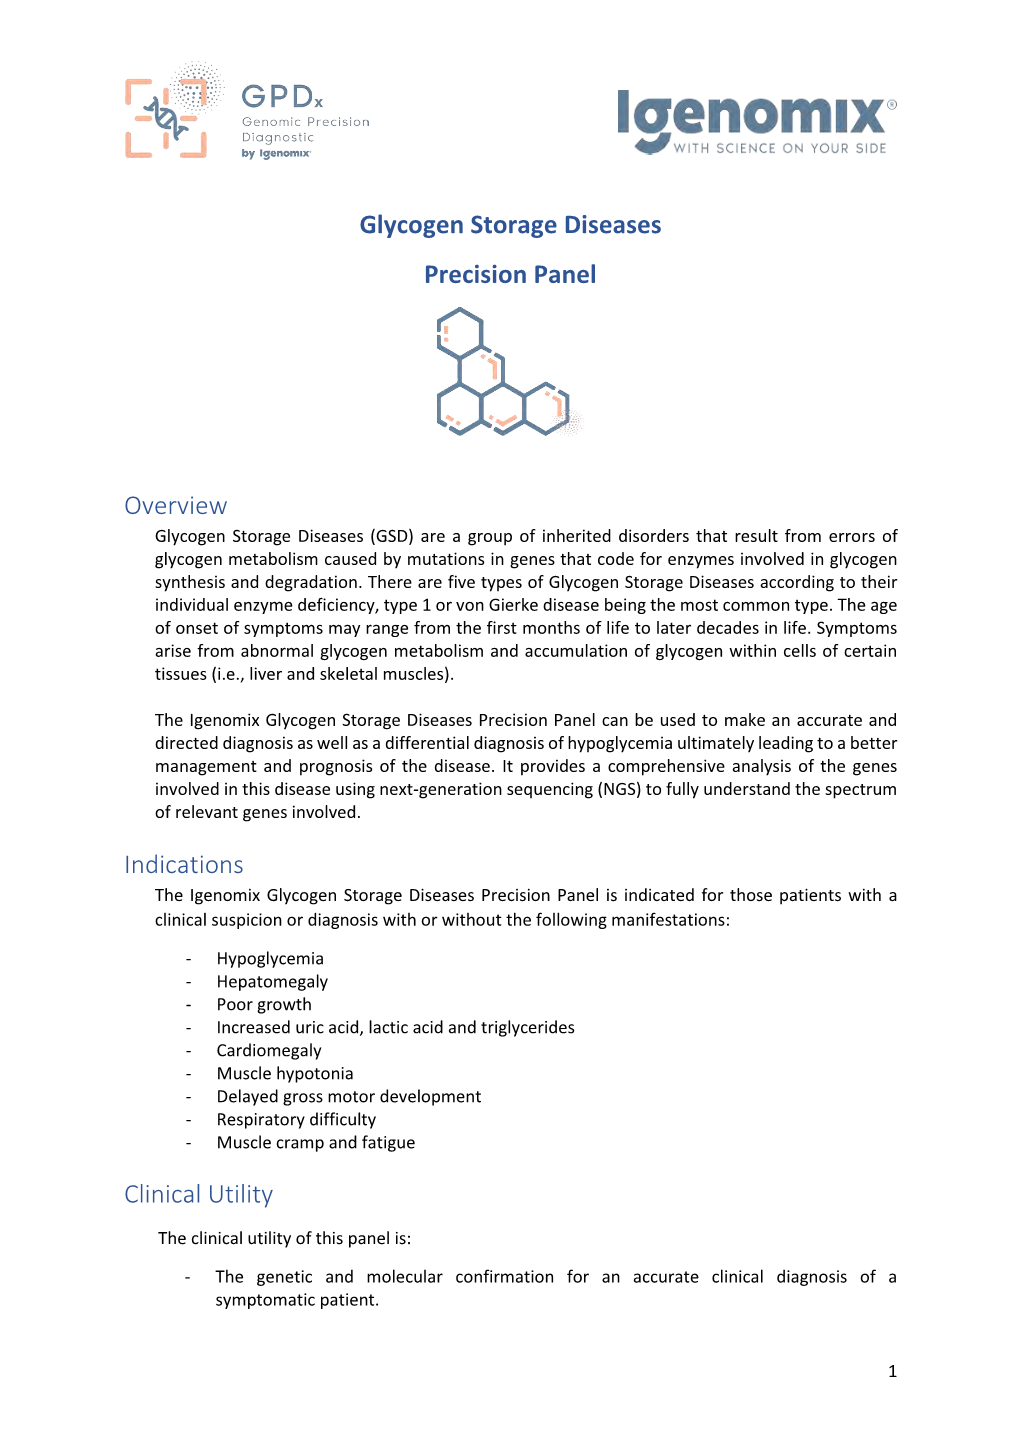 Glycogen Storage Diseases Precision Panel Overview Indications Clinical Utility